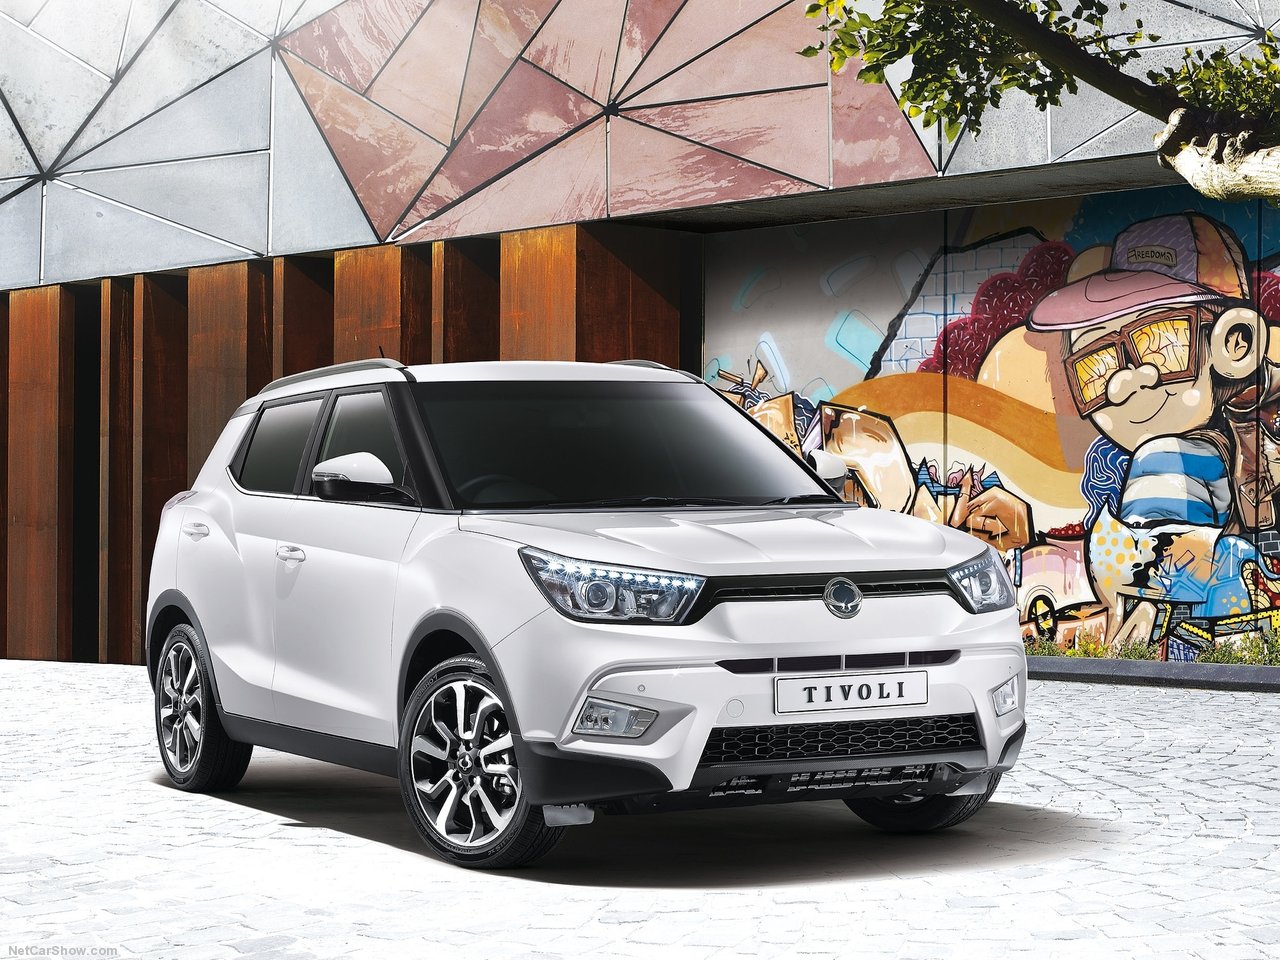 Ssangyong is no more! Meet KGM Motors, and its new UK line-up